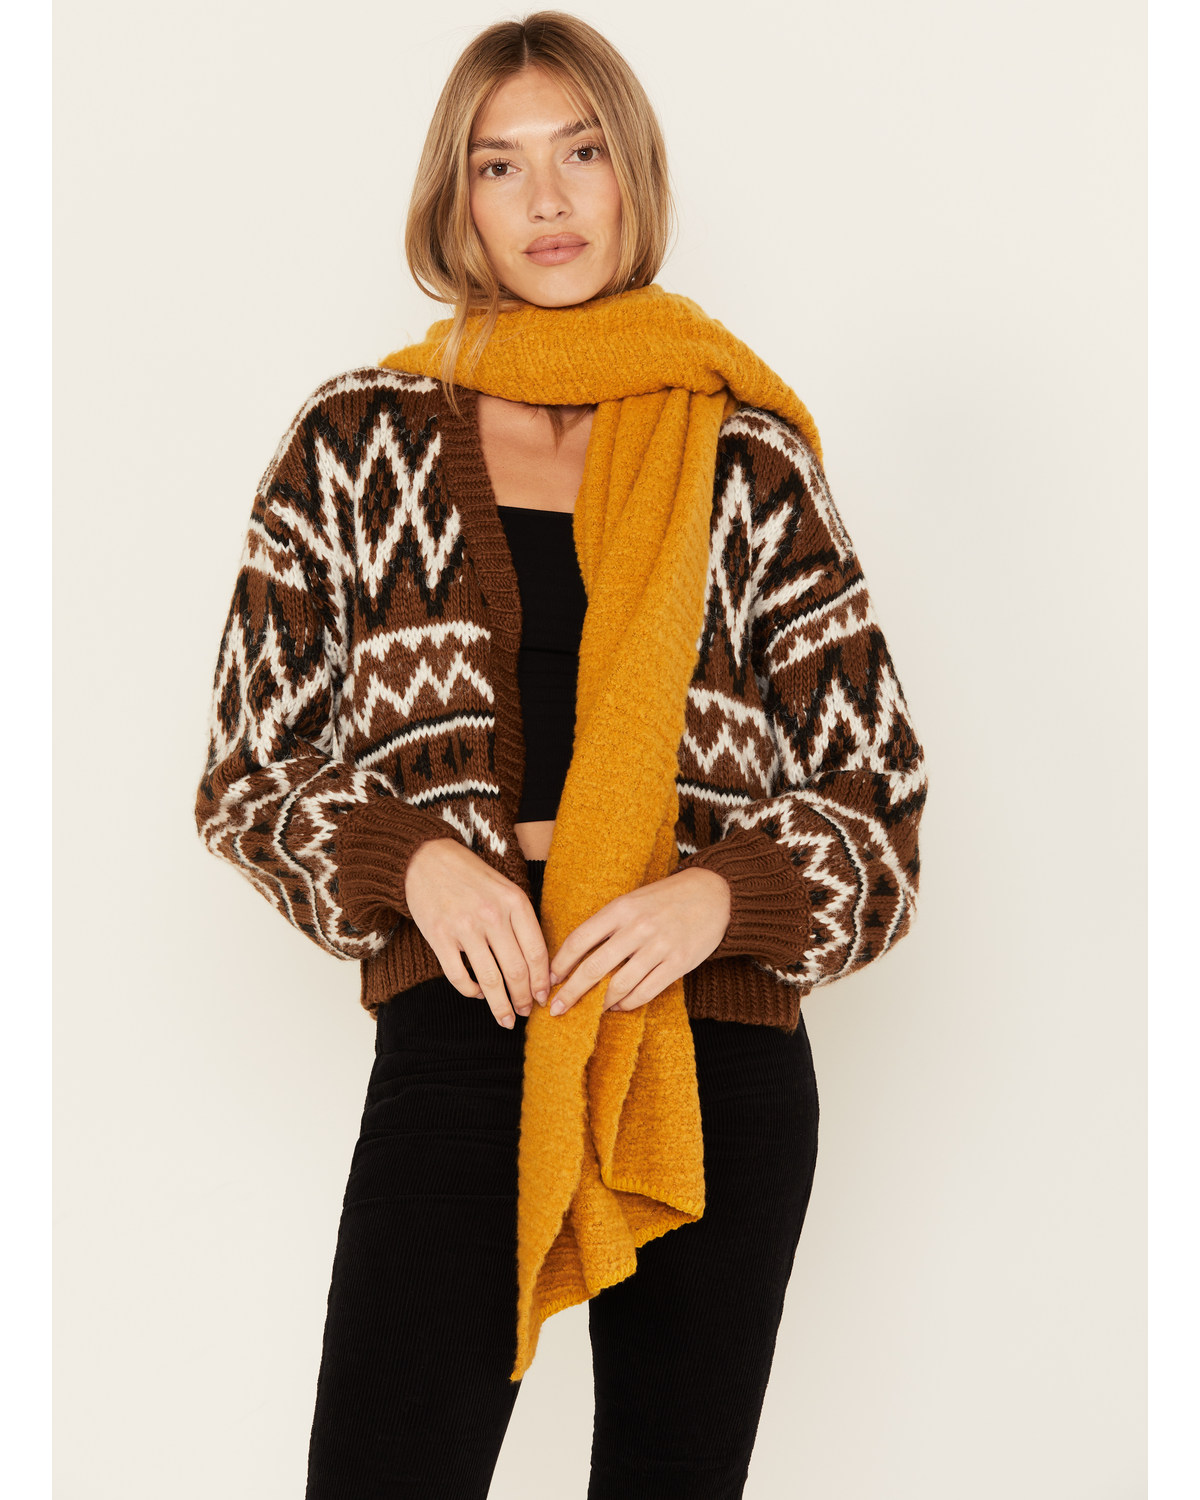 Free People Women's Ripple Recycled Blend Blanket Scarf